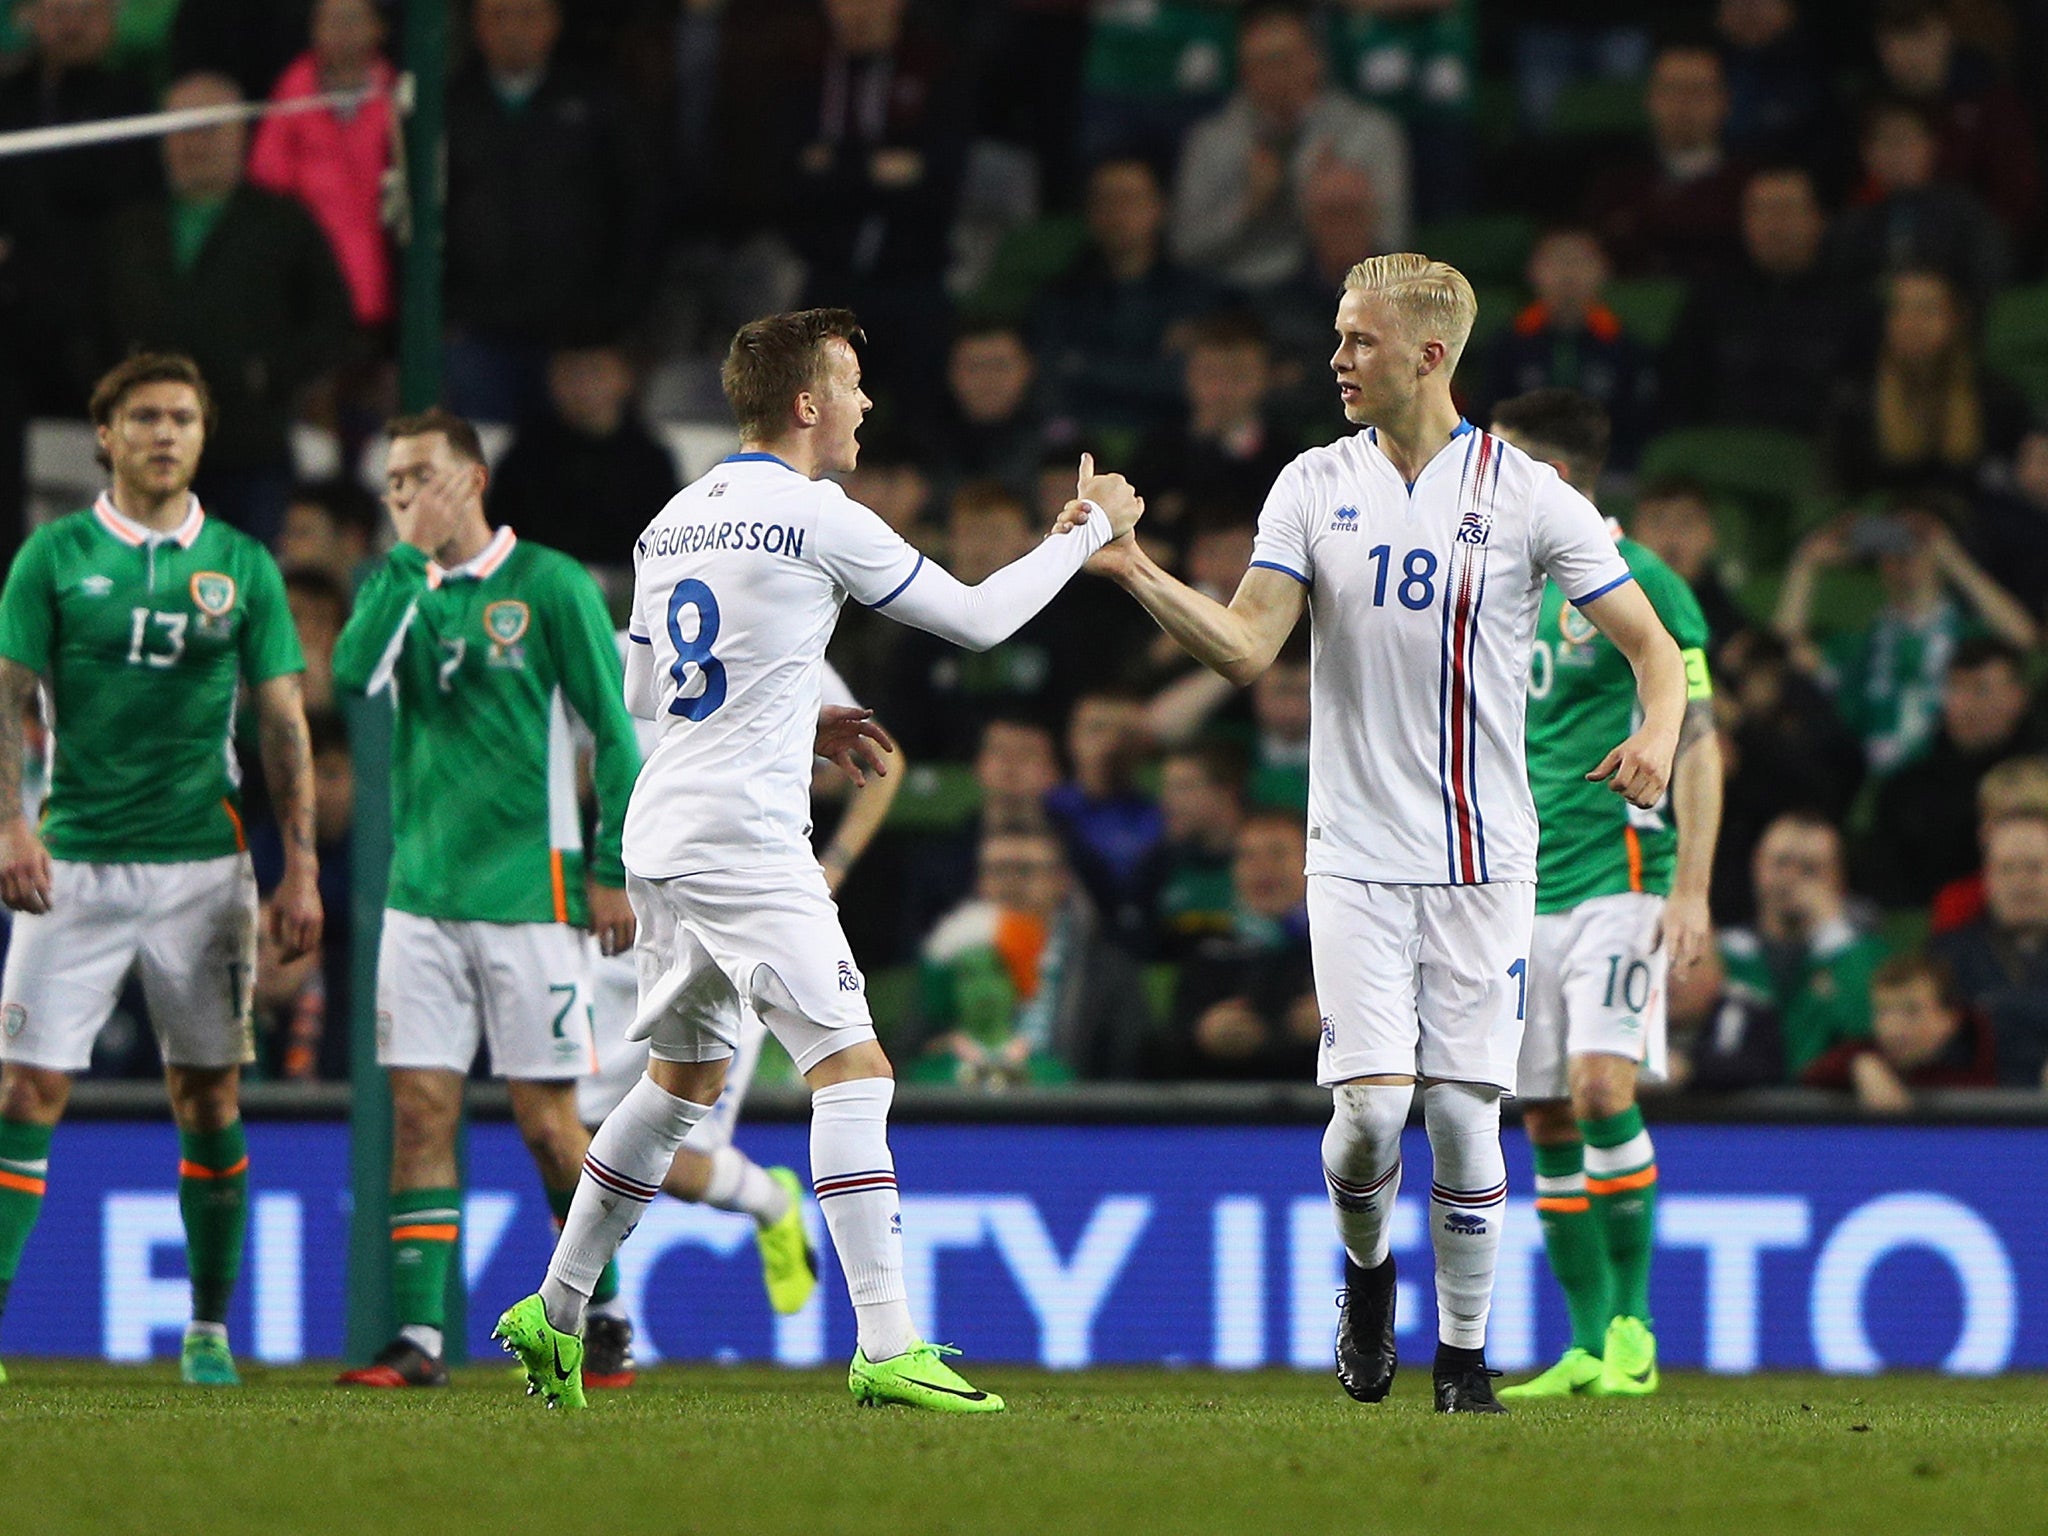 Hordur Magnusson's first-half free-kick proved to be enough for the Icemen